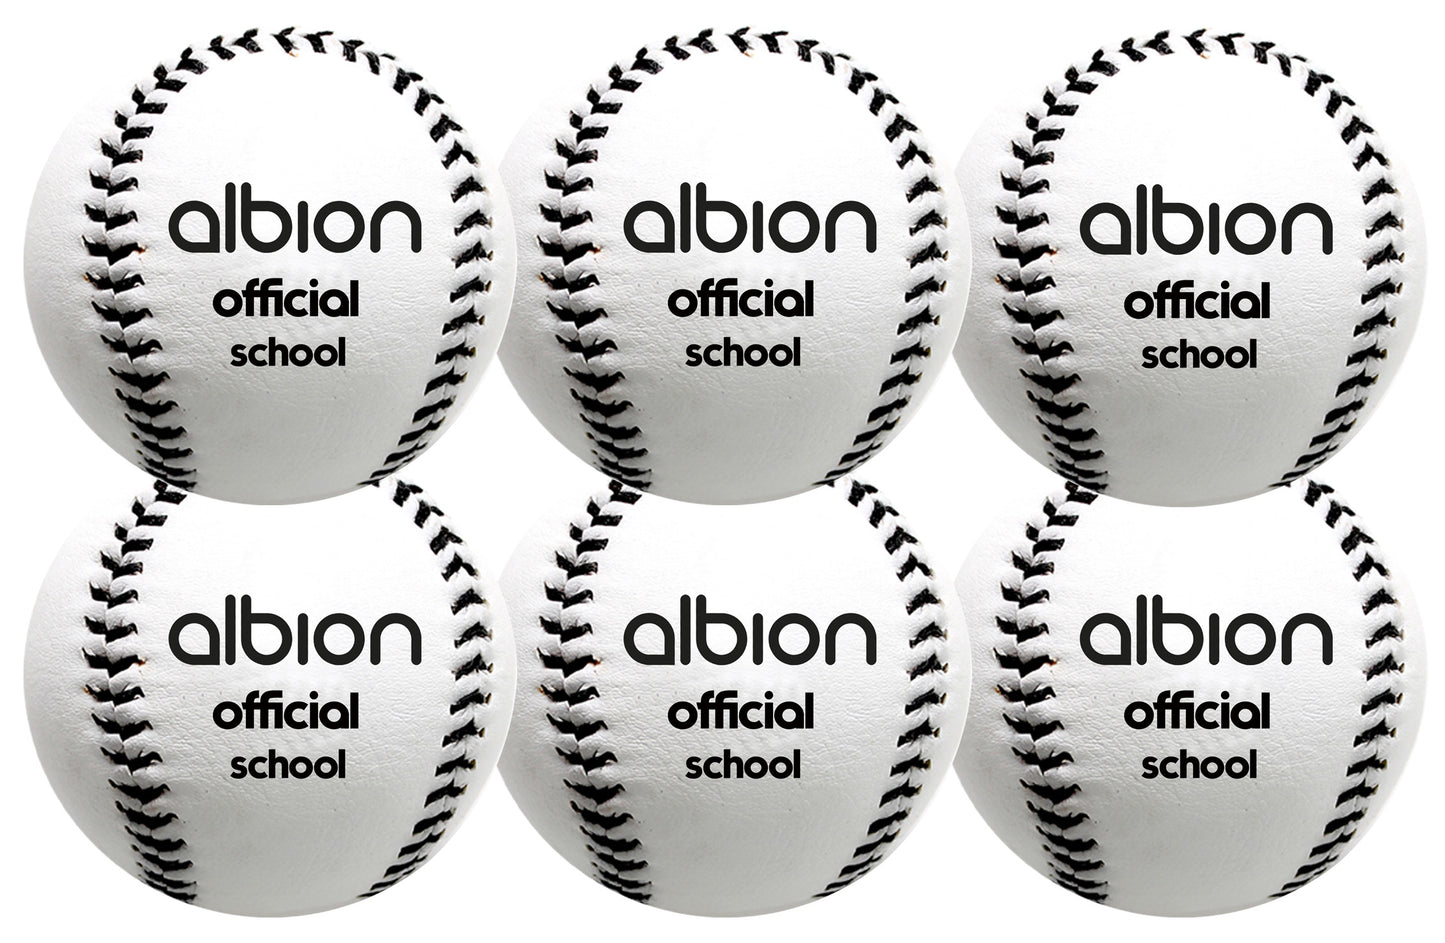 Albion Official School Rounders Ball